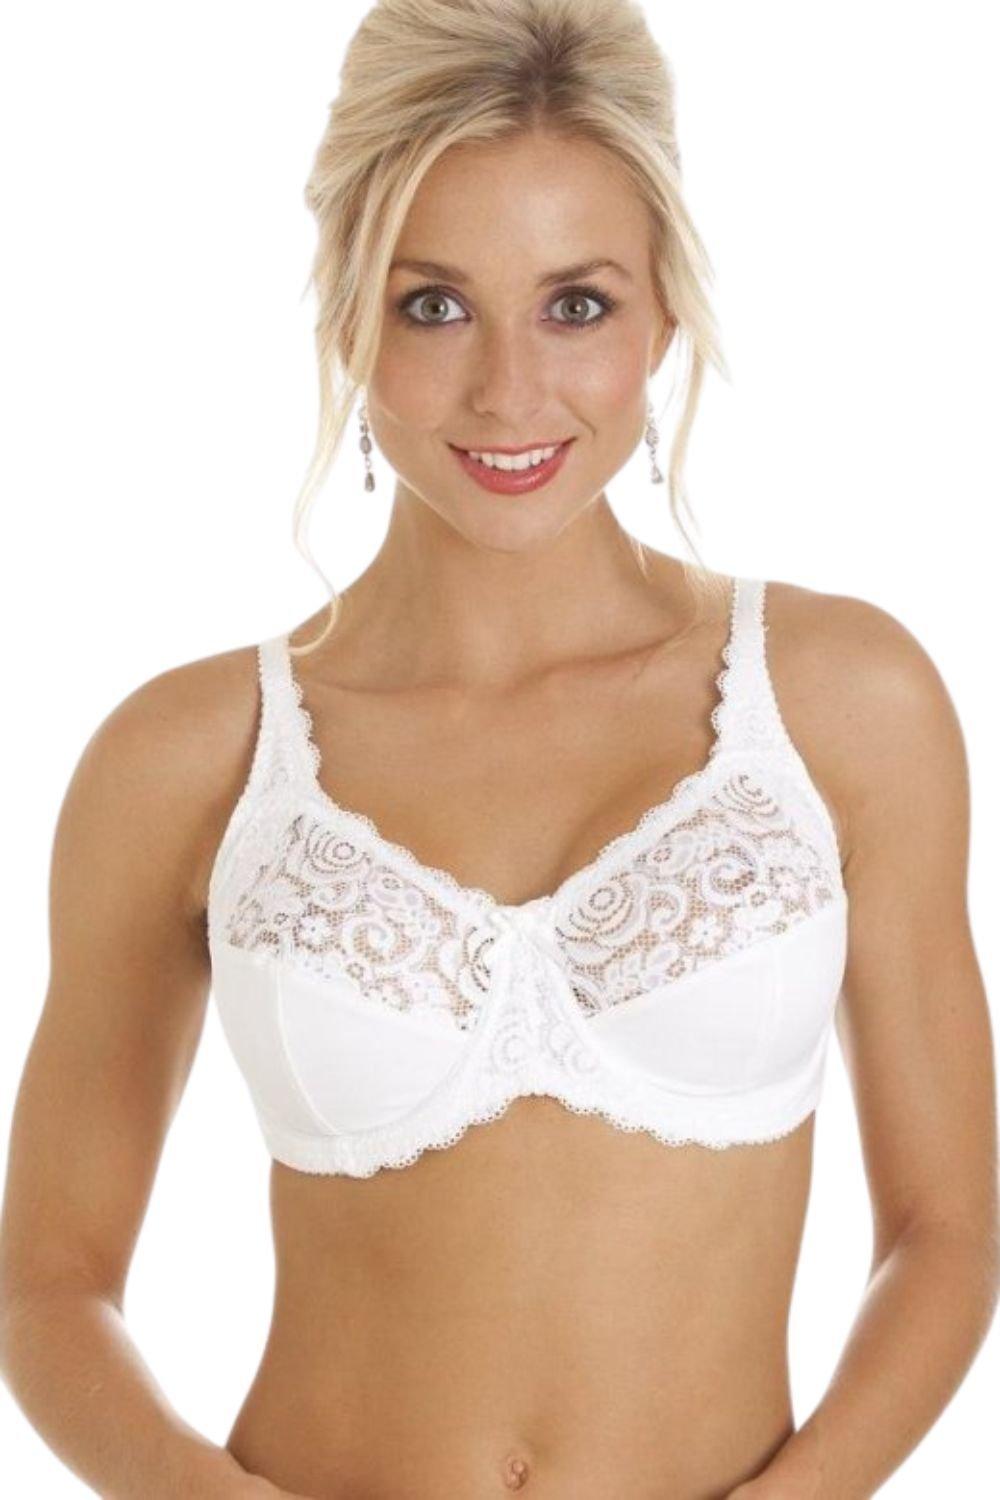 debenhams 2 Pieces Padded non-wired bra w soft cups